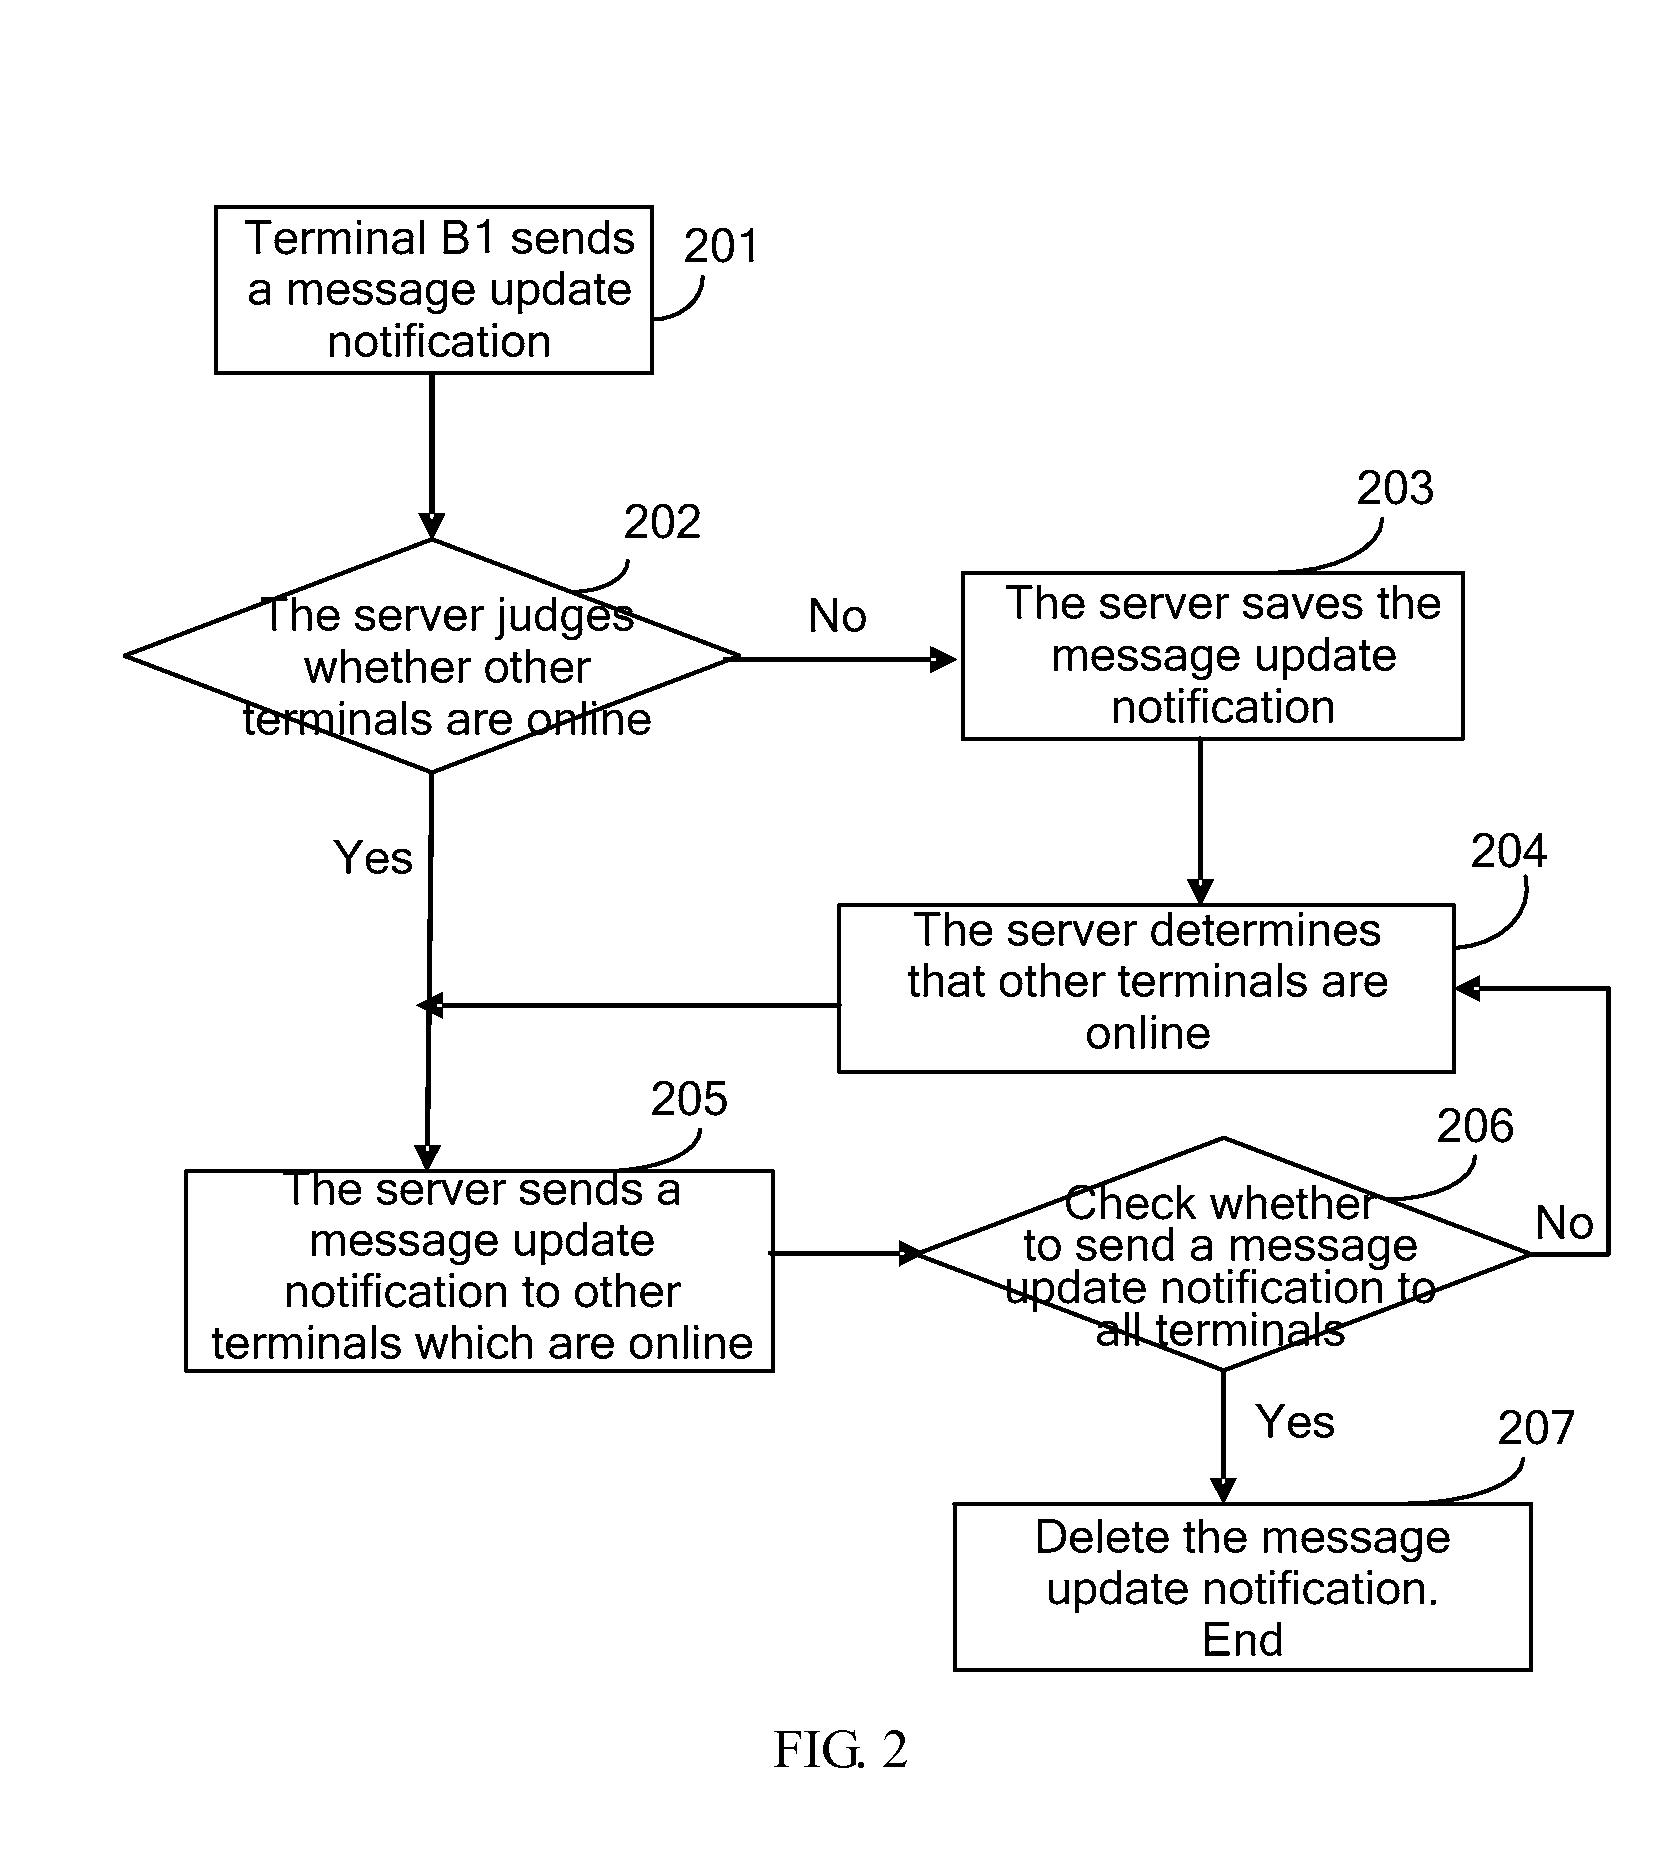 Method and apparatus for synchronizing messages between multiple terminals